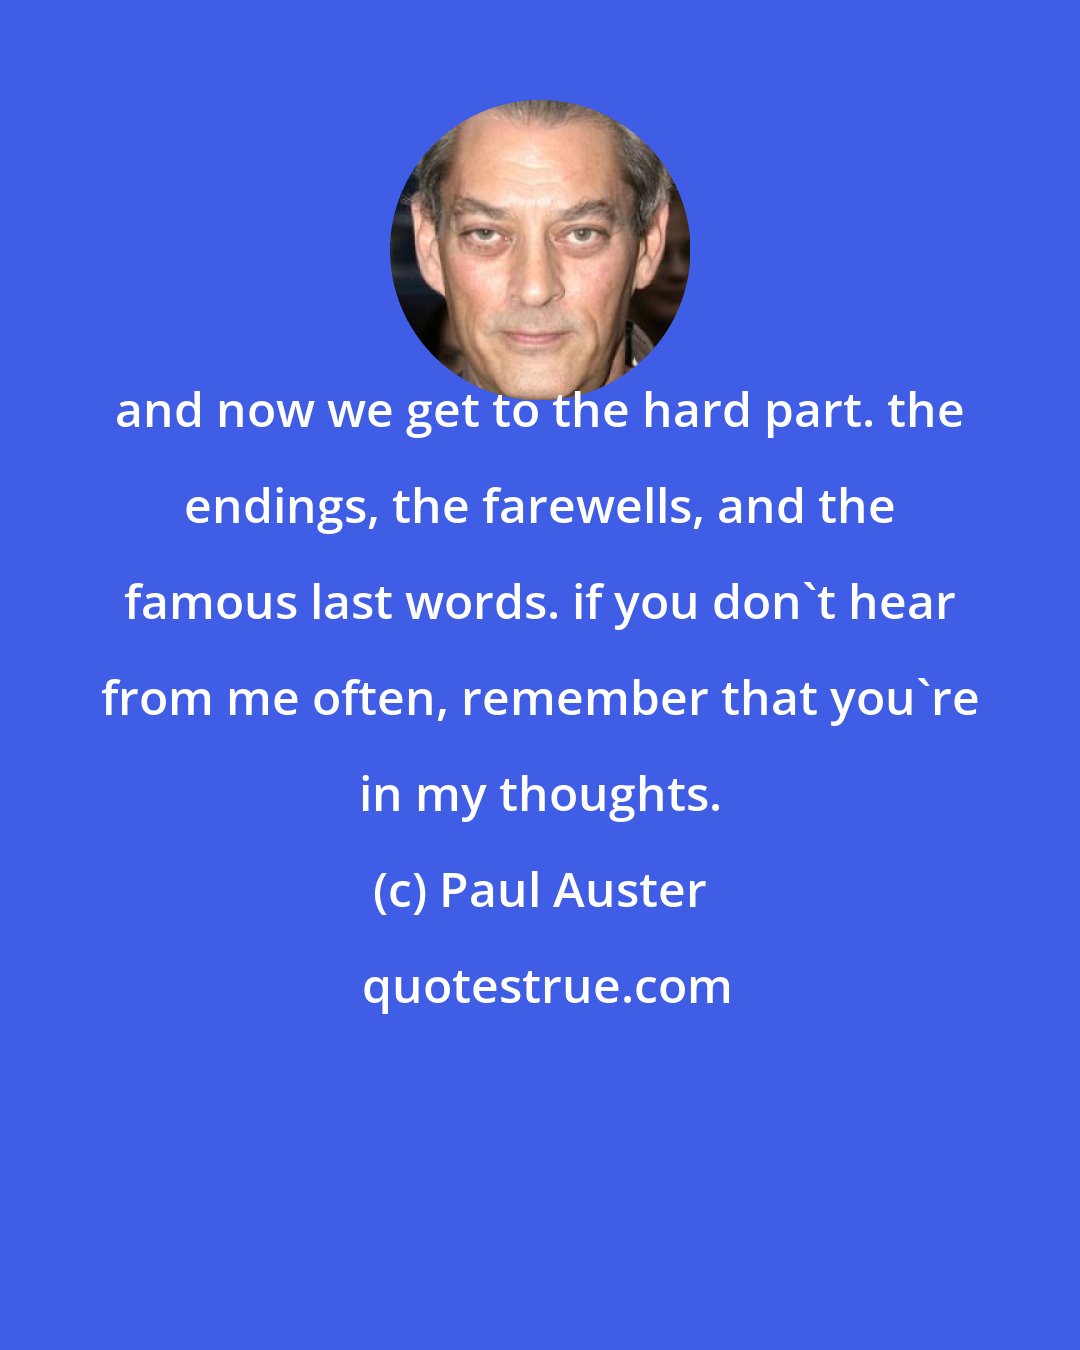 Paul Auster: and now we get to the hard part. the endings, the farewells, and the famous last words. if you don't hear from me often, remember that you're in my thoughts.